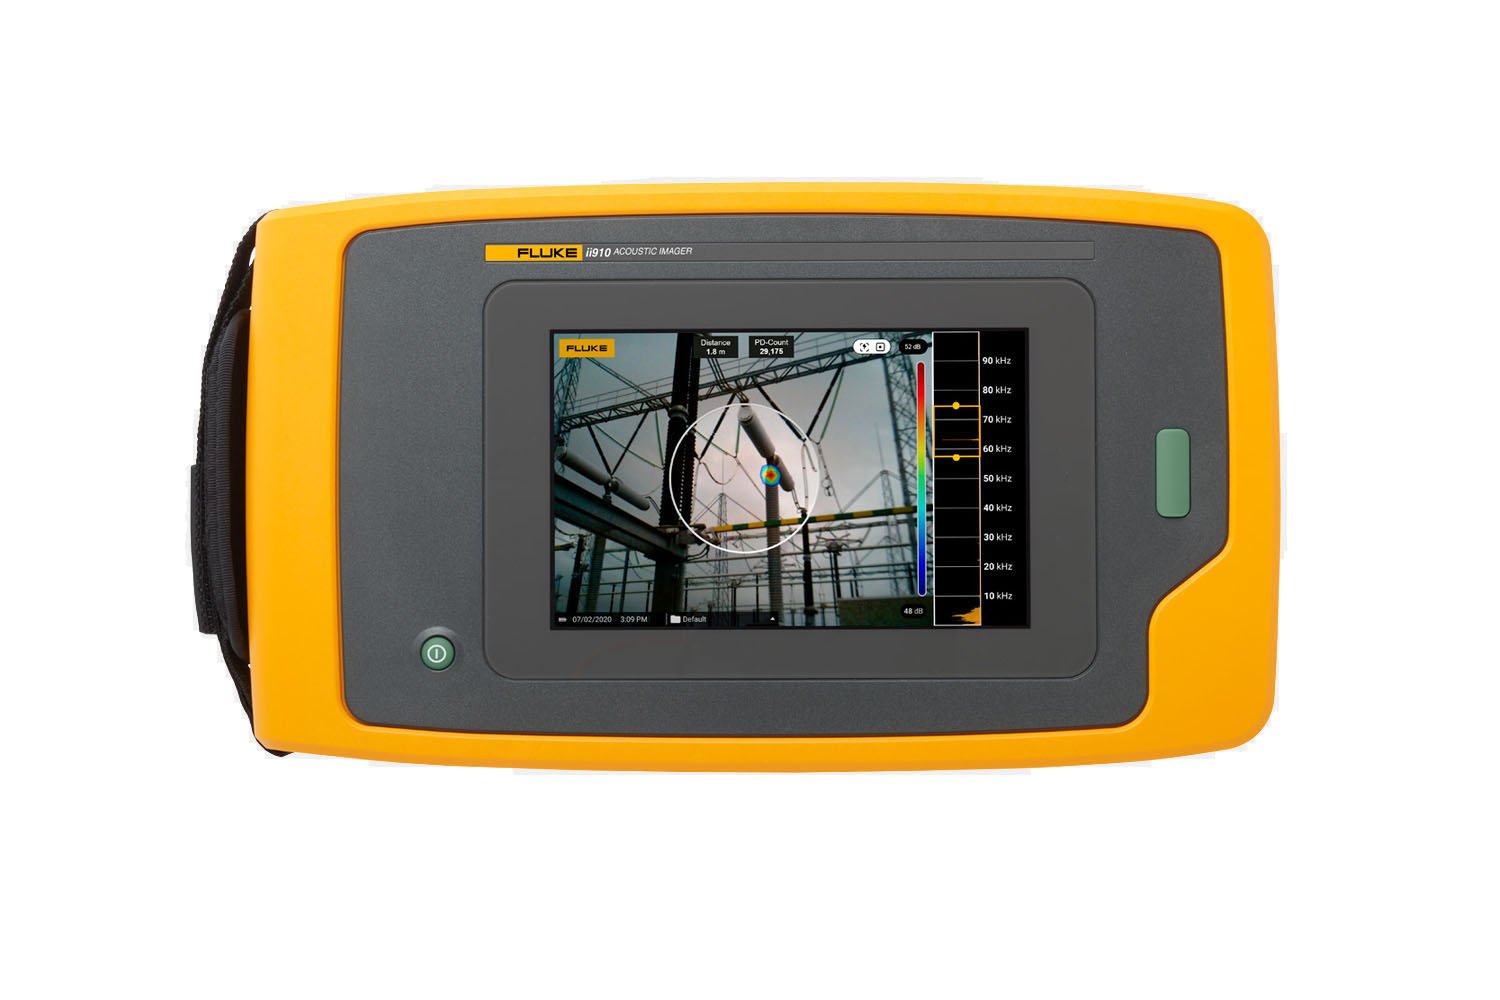 ii910 Precision Acoustic Imager, Advanced diagnostic tool for precise industrial inspection and maintenance